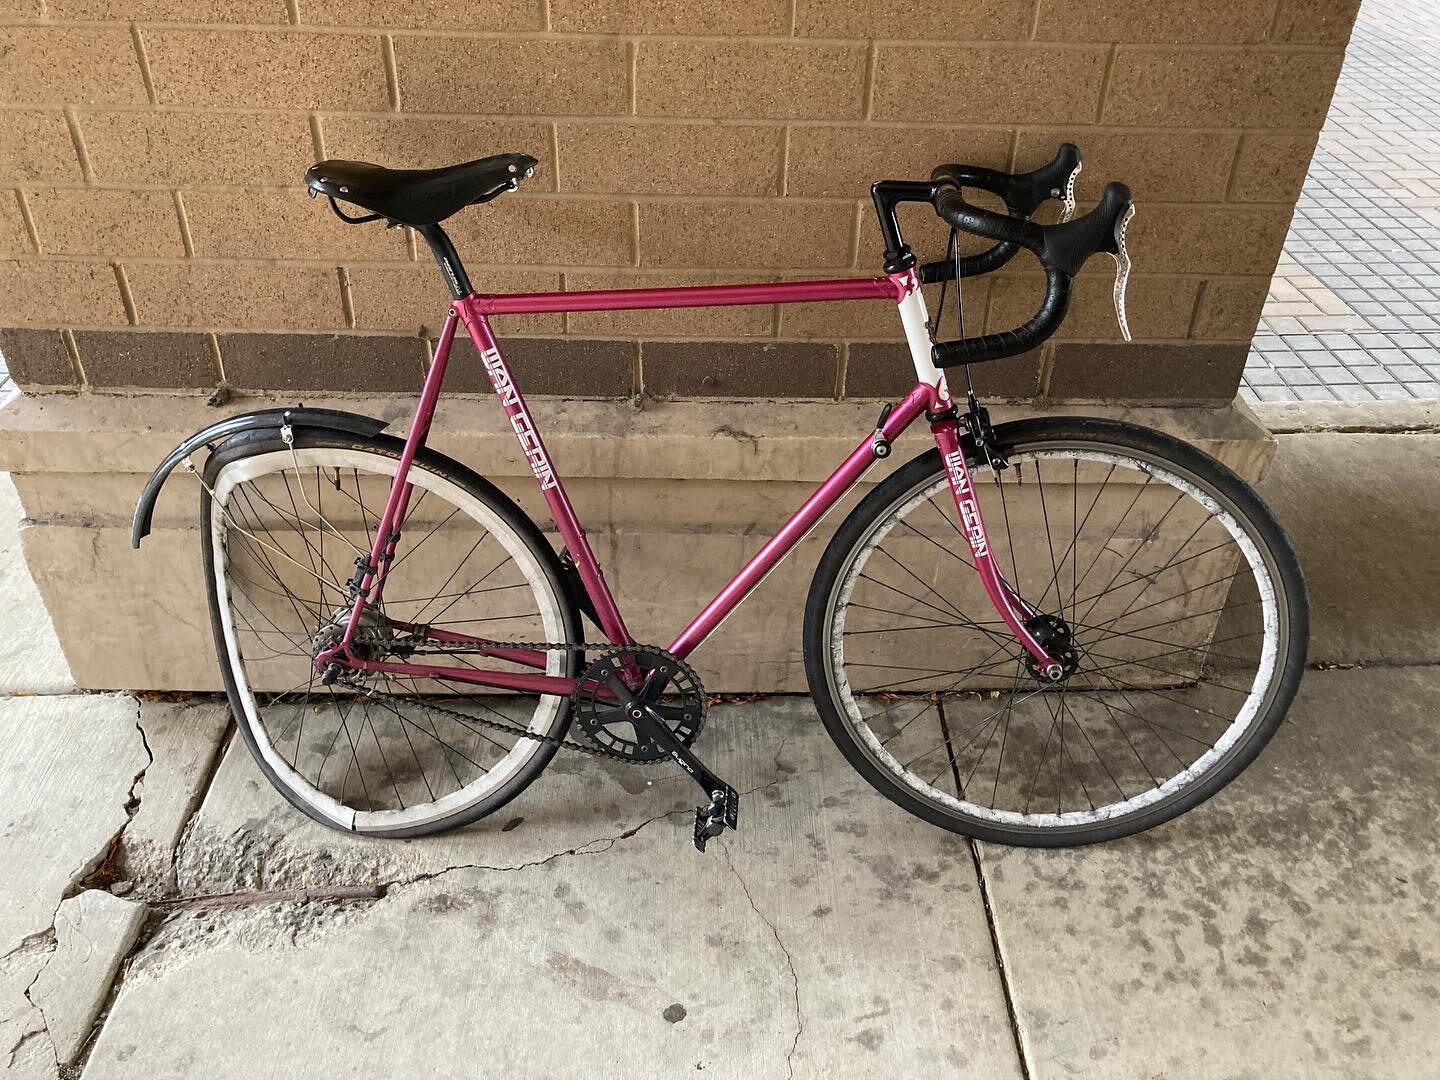 Two years ago as I walked away from a road rage incident, the driver of an SUV purposefully drove into my bicycle, destroying the back wheel. Thankfully the frame was unharmed. I rebuilt the wheel and the bike is restored! I like it better in black. 